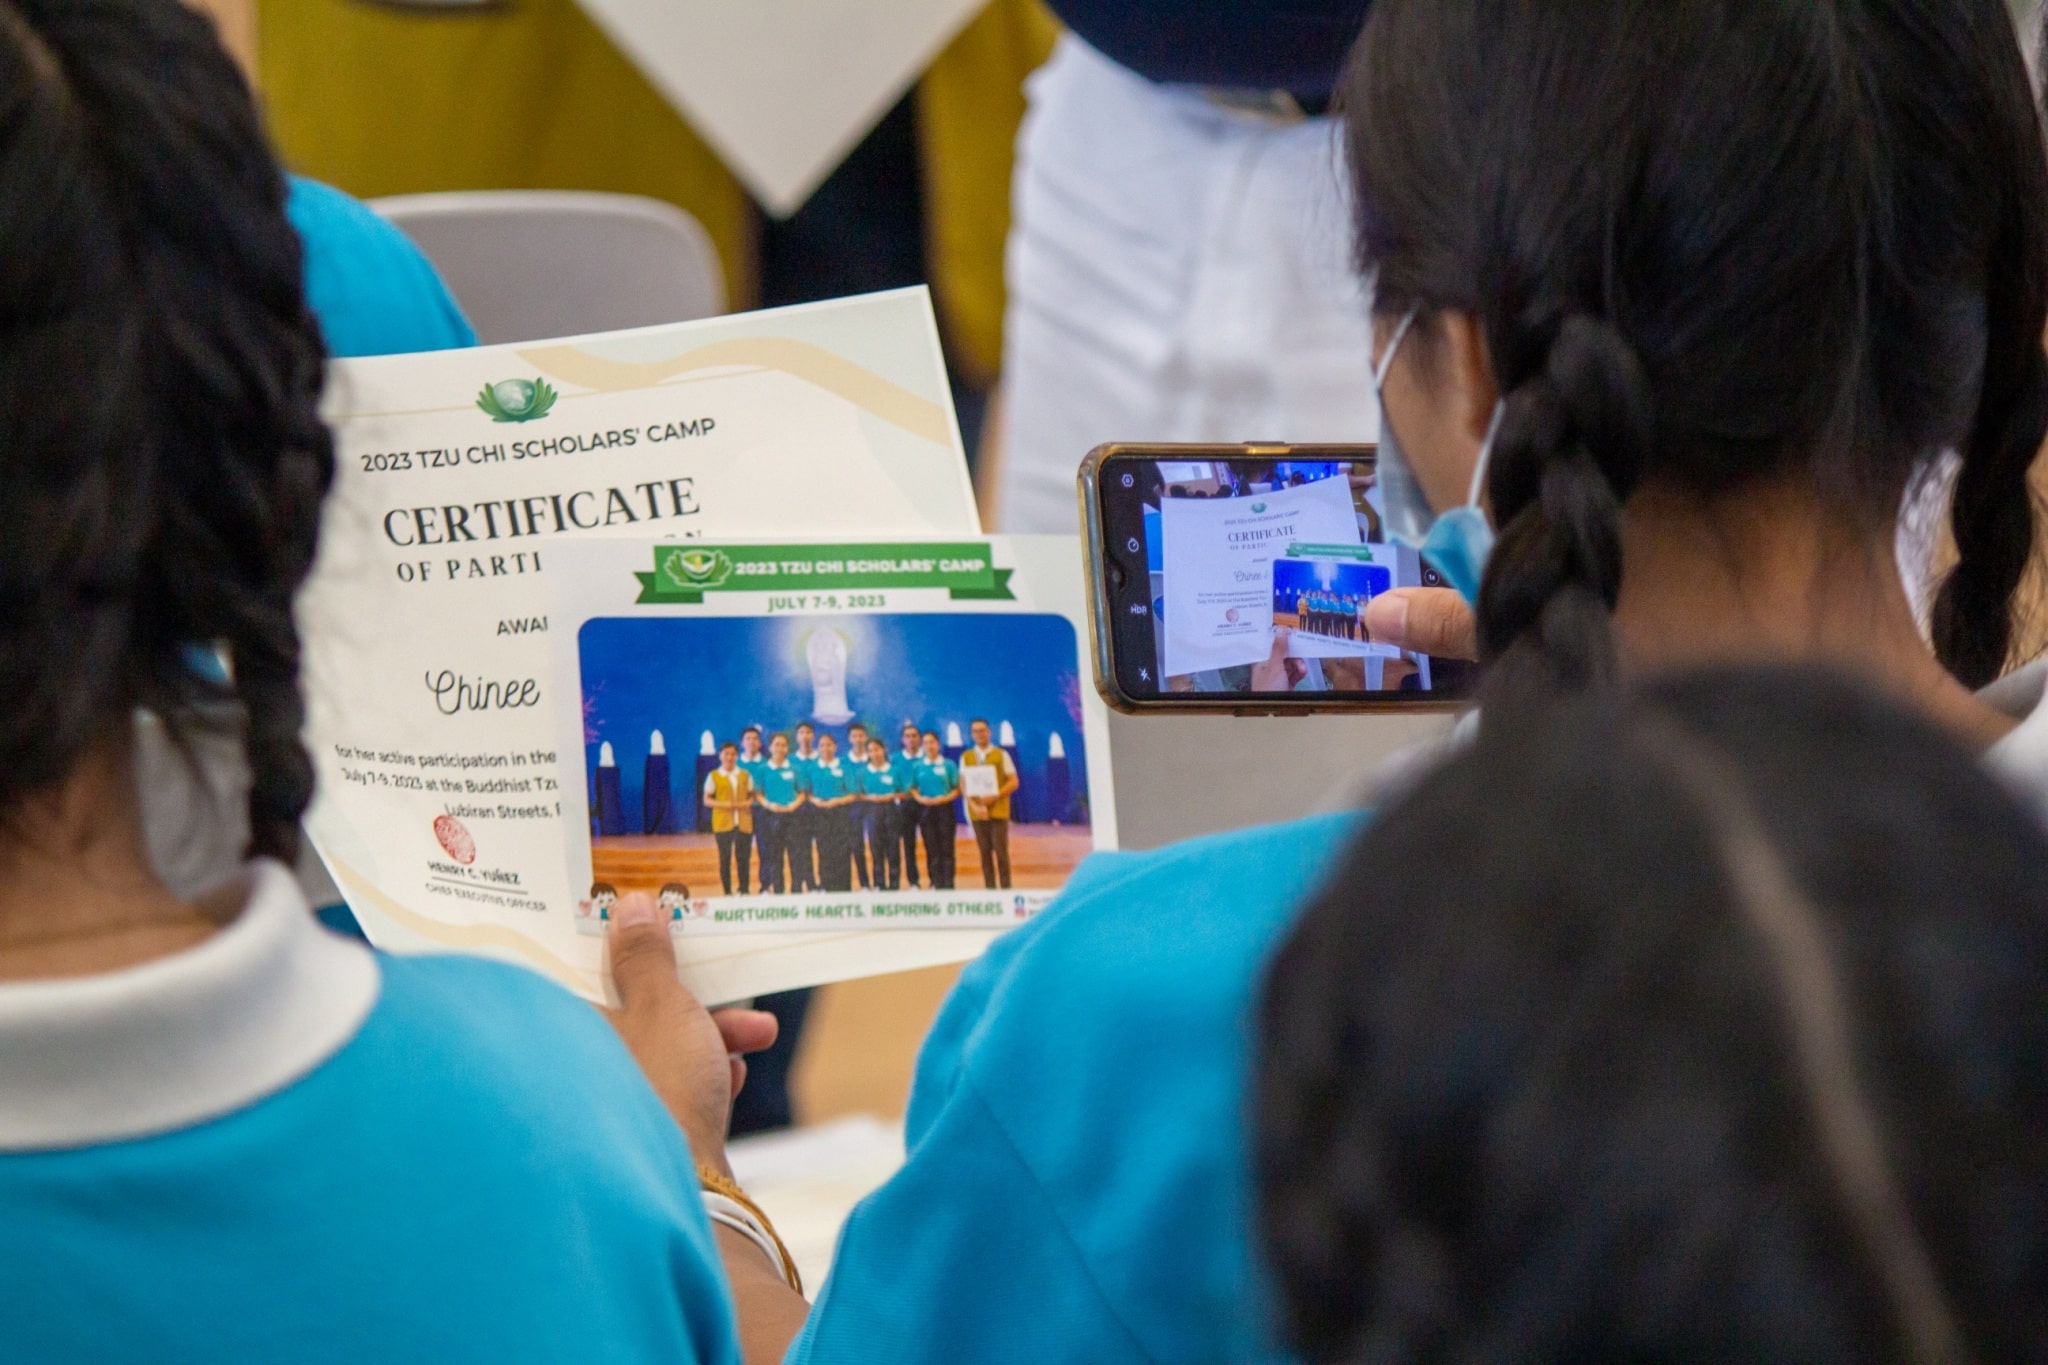 A scholar takes a photo of her camp souvenir and certificate. 【Photo by Marella Saldonido】